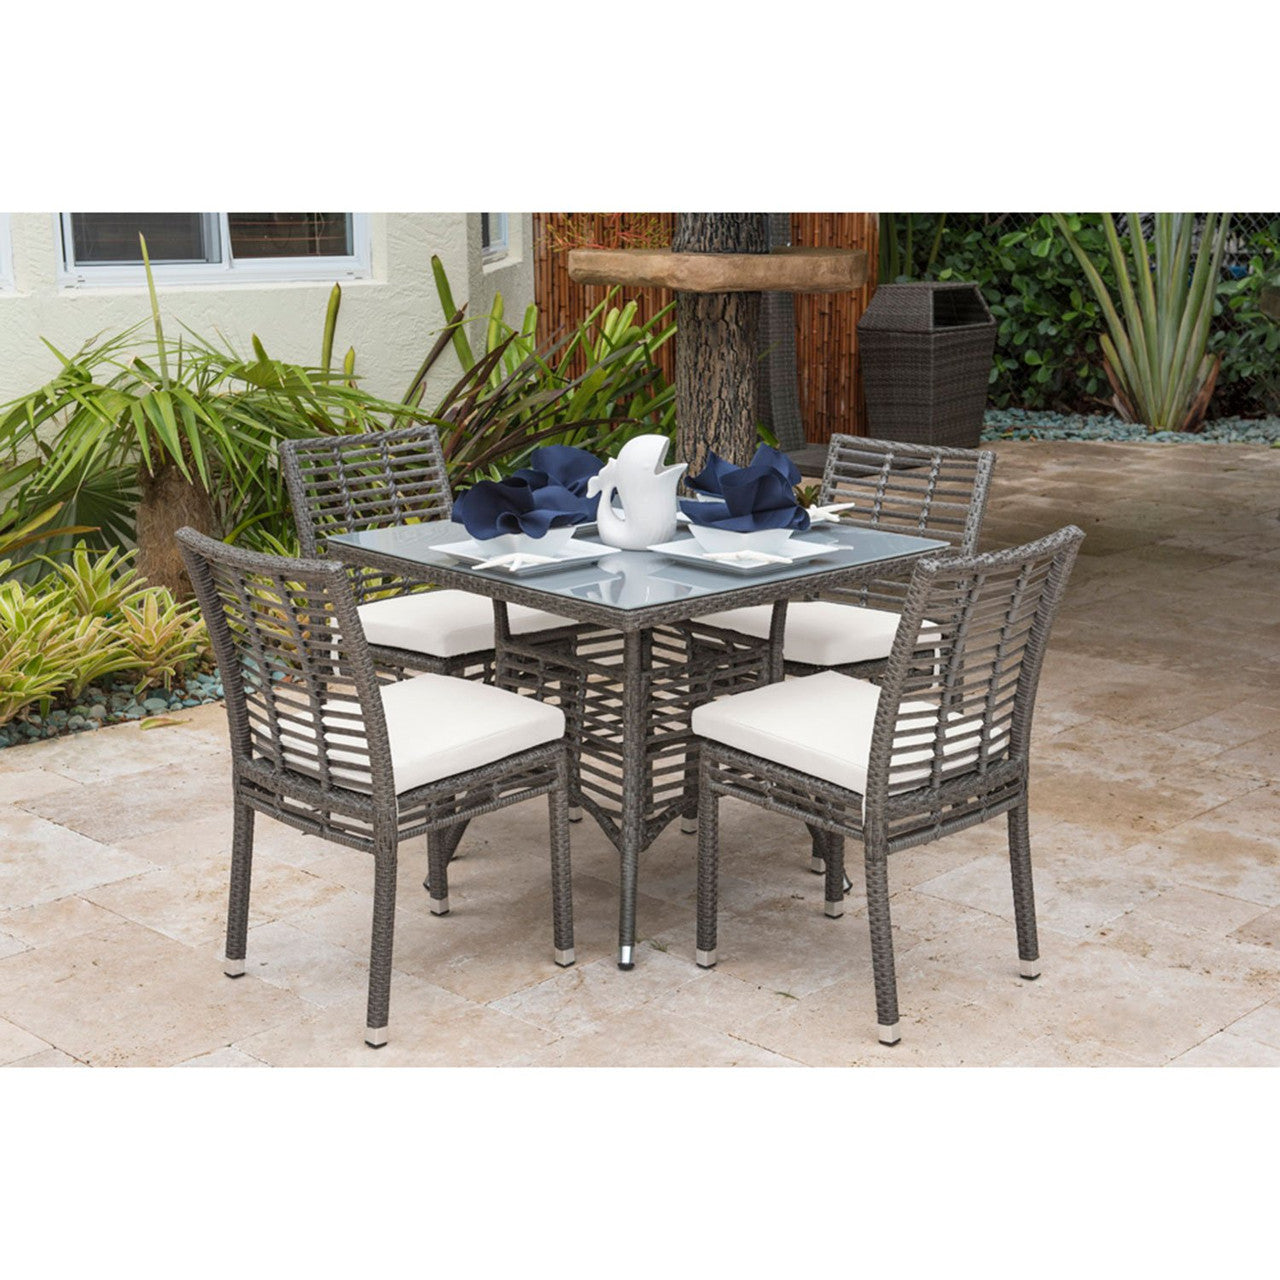 Panama Jack Graphite 5 PC Side Chairs Dining Set with Cushions